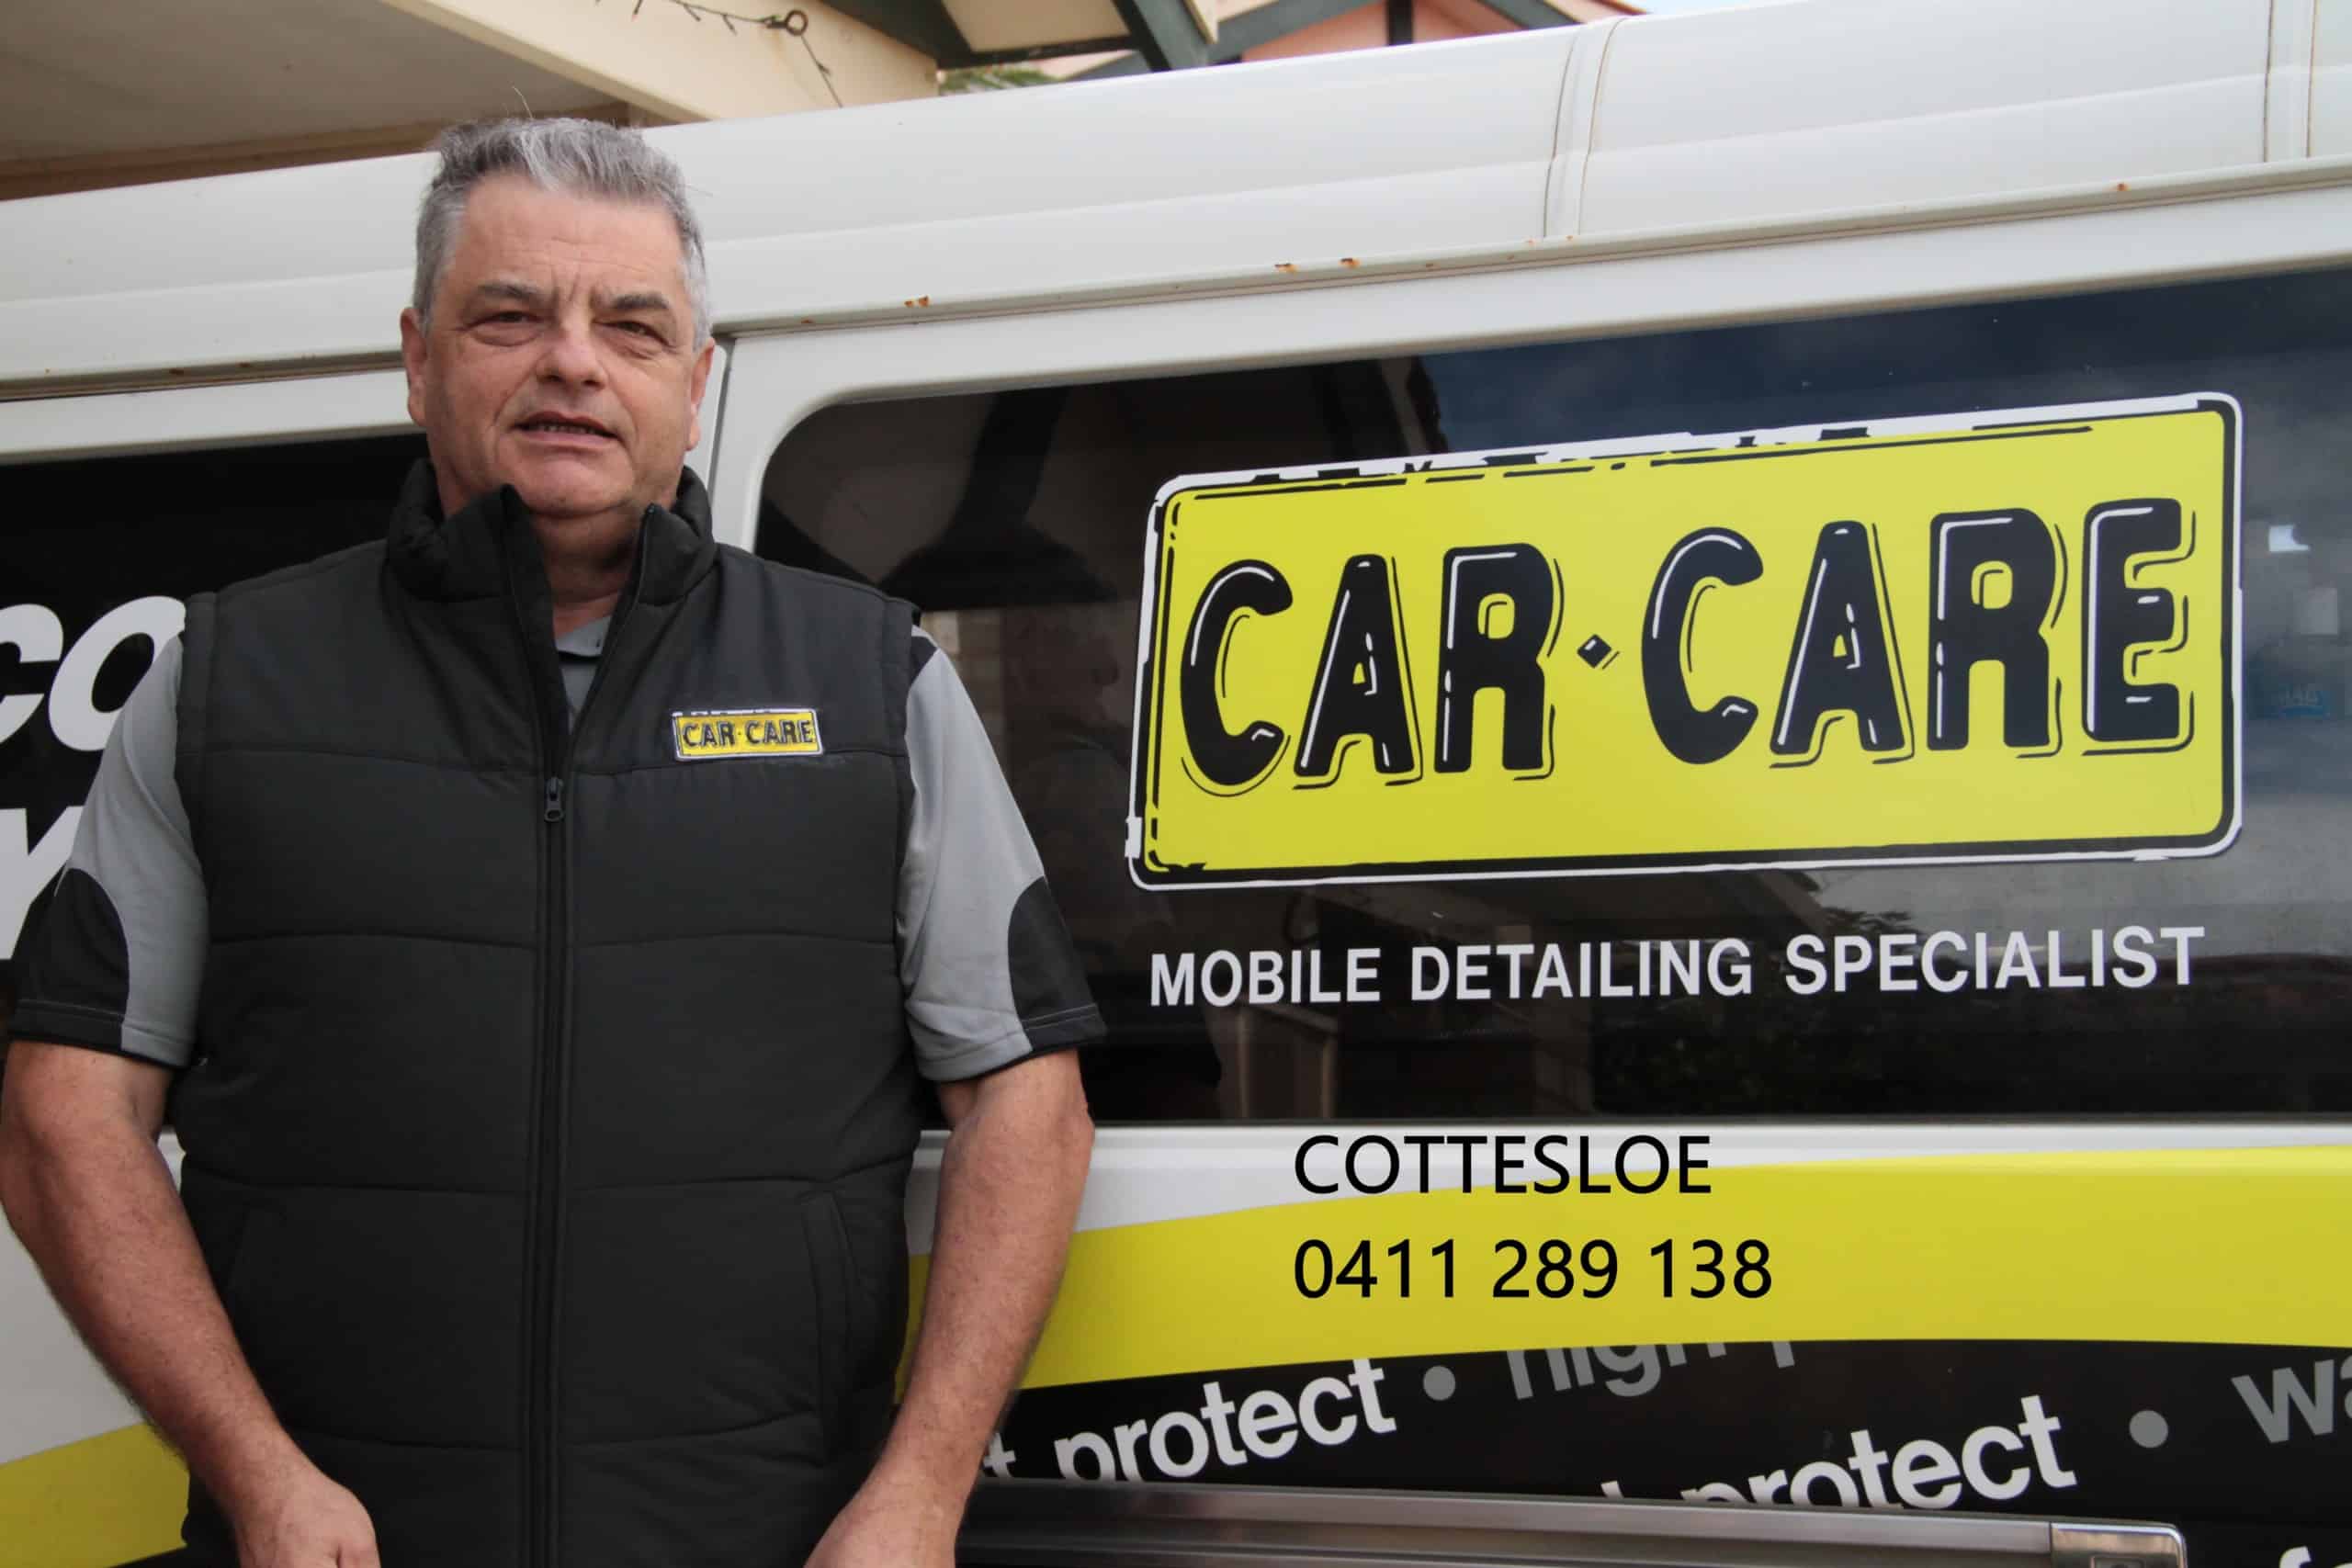 Con Car Care Cottesloe standing in front of detailing van